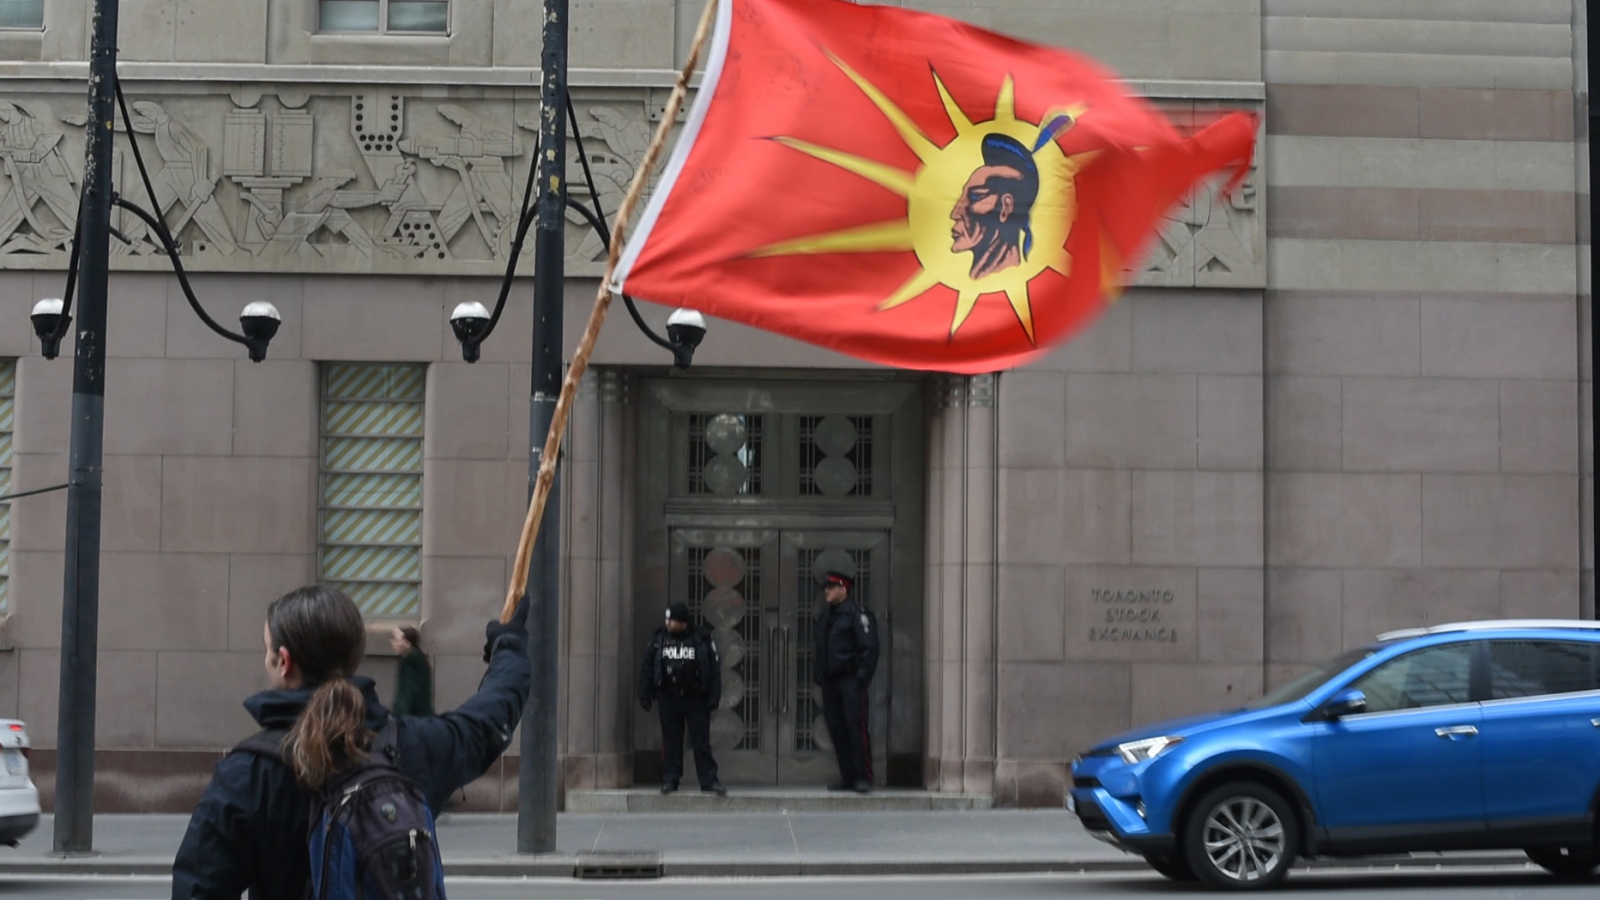 A man waves the Mohawk Warrior Society flag at a protest outside TD Bank's headquarters in downtown Toronto on March 30, 2017, to demand that the company end its partnership with Kinder Morgan. Photo by National Observer.